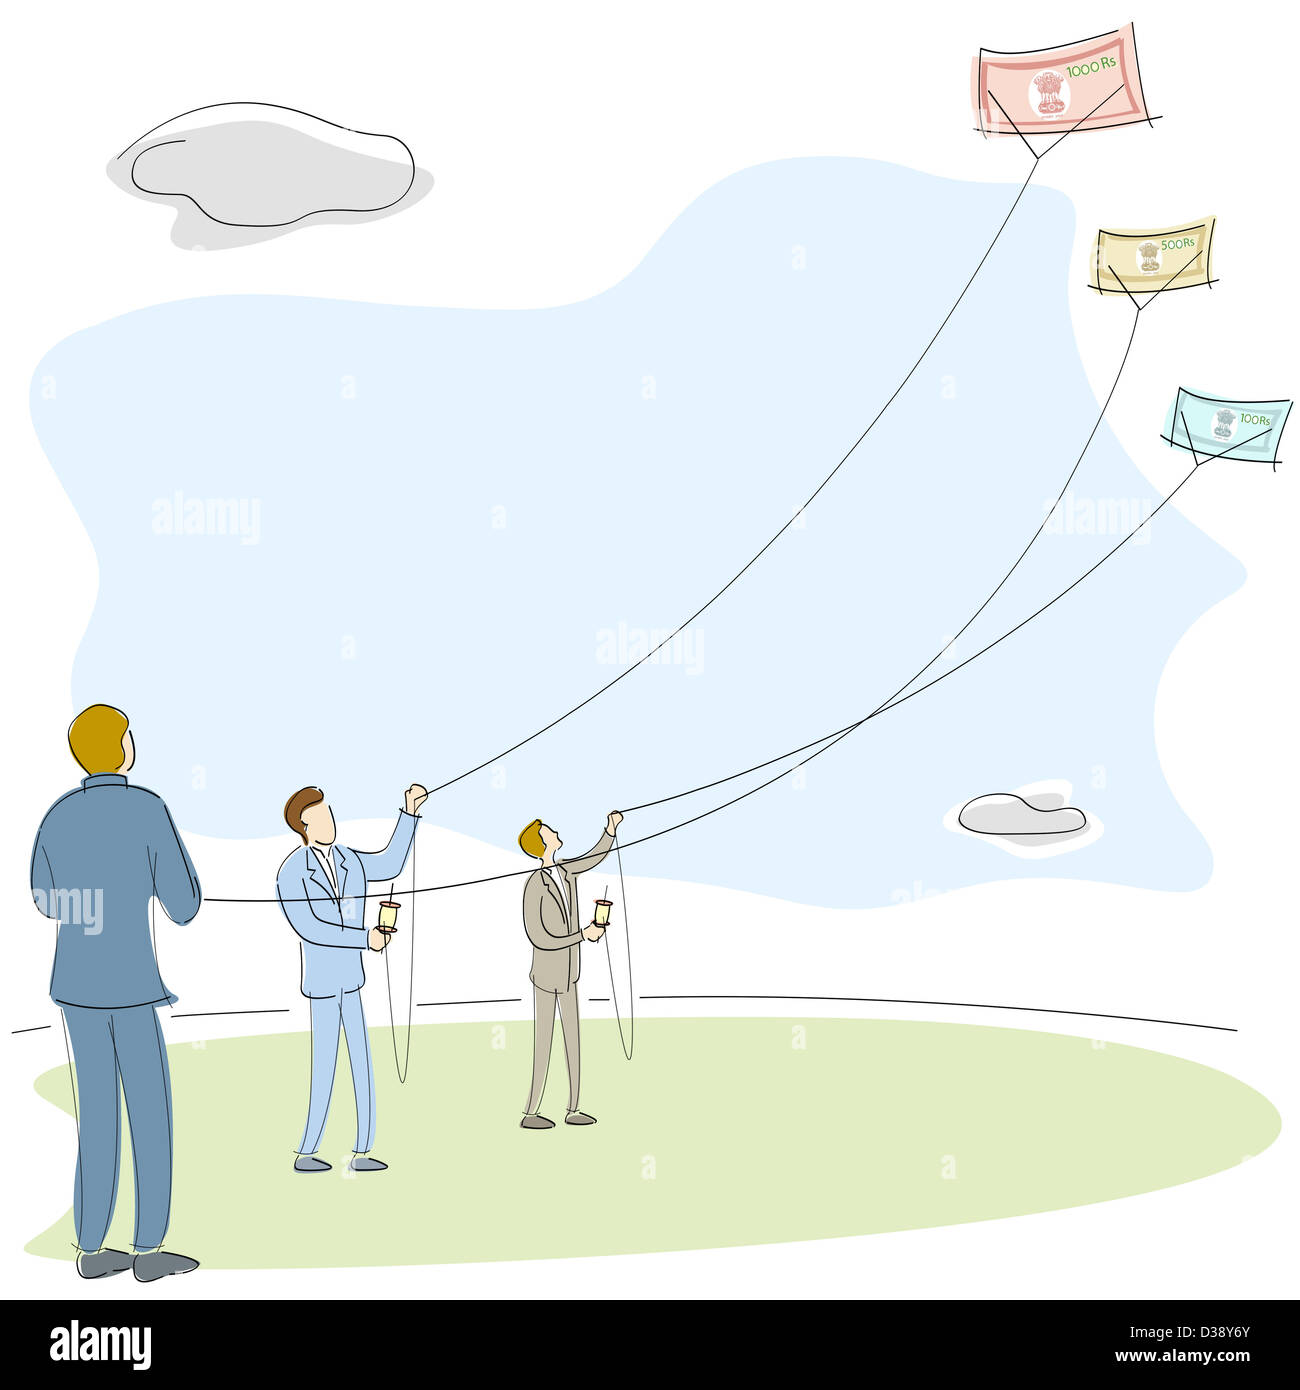 Businessmen flying kites of money in a field Stock Photo